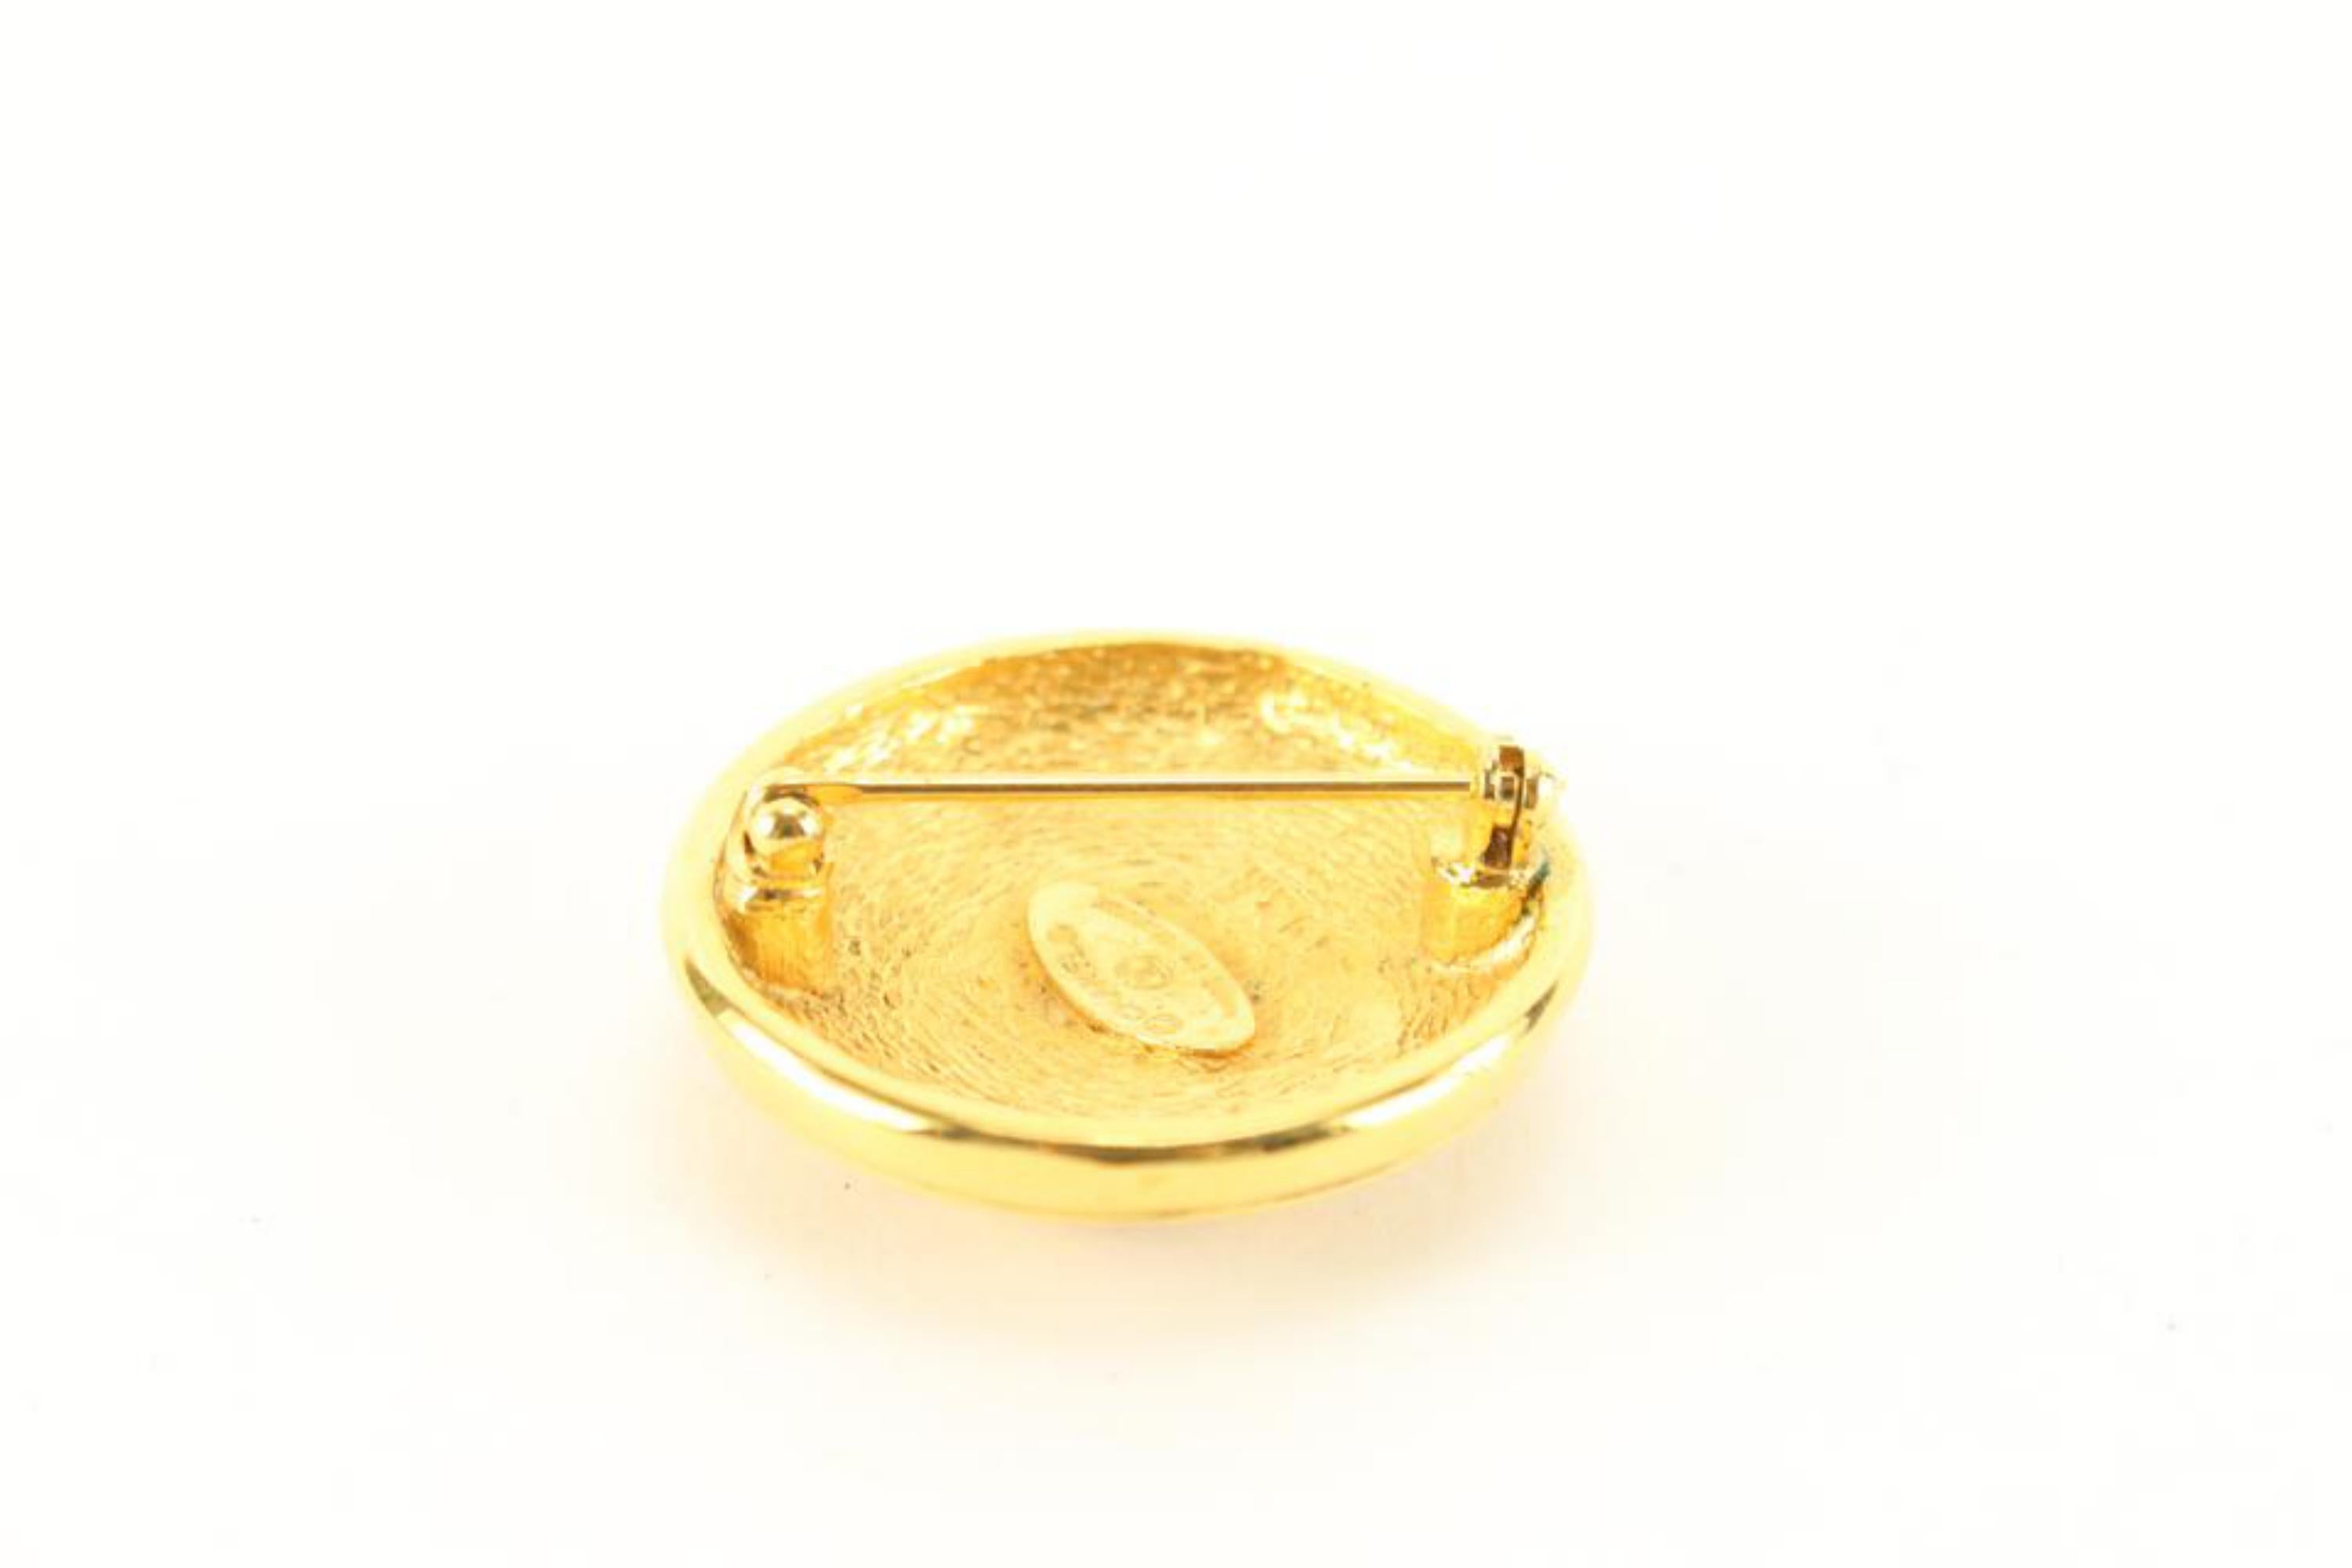 Chanel 24k Gold Plated CC Spiral Brooch Pin 42ck83s In Good Condition For Sale In Dix hills, NY